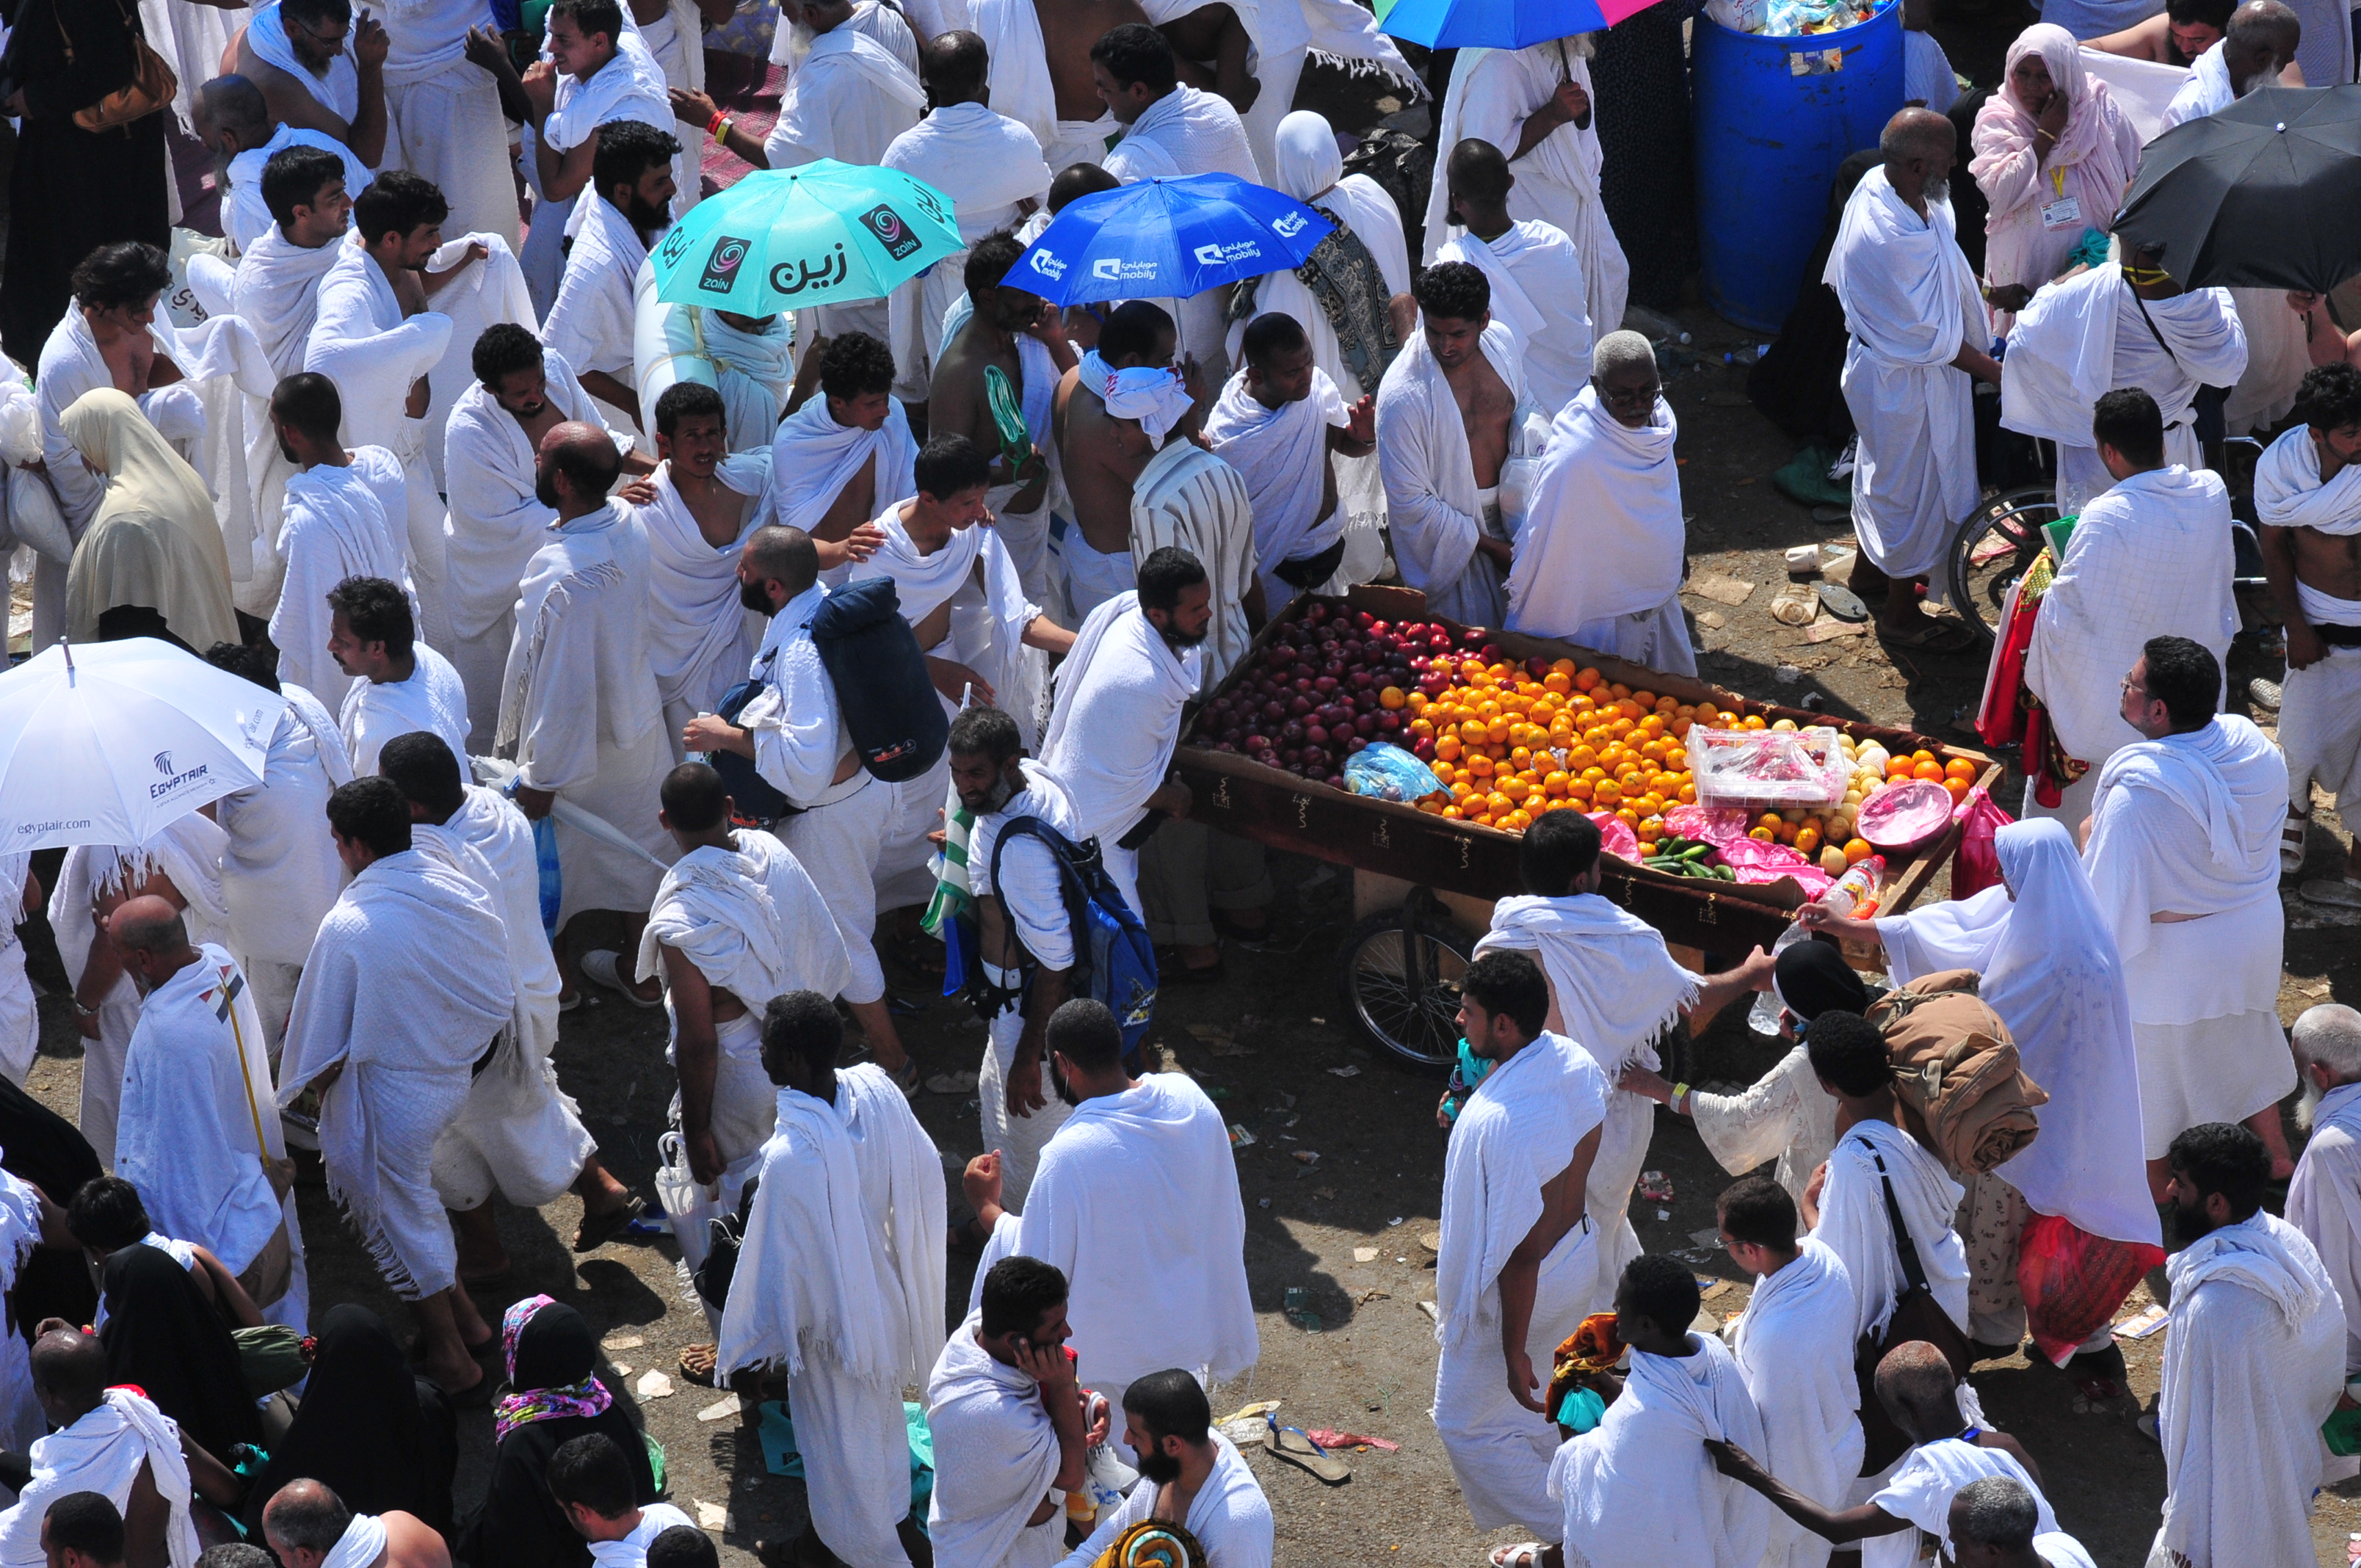 Vendors also join the crowds, to sell food to hungry pilgrims. - Flickr - Al Jazeera English